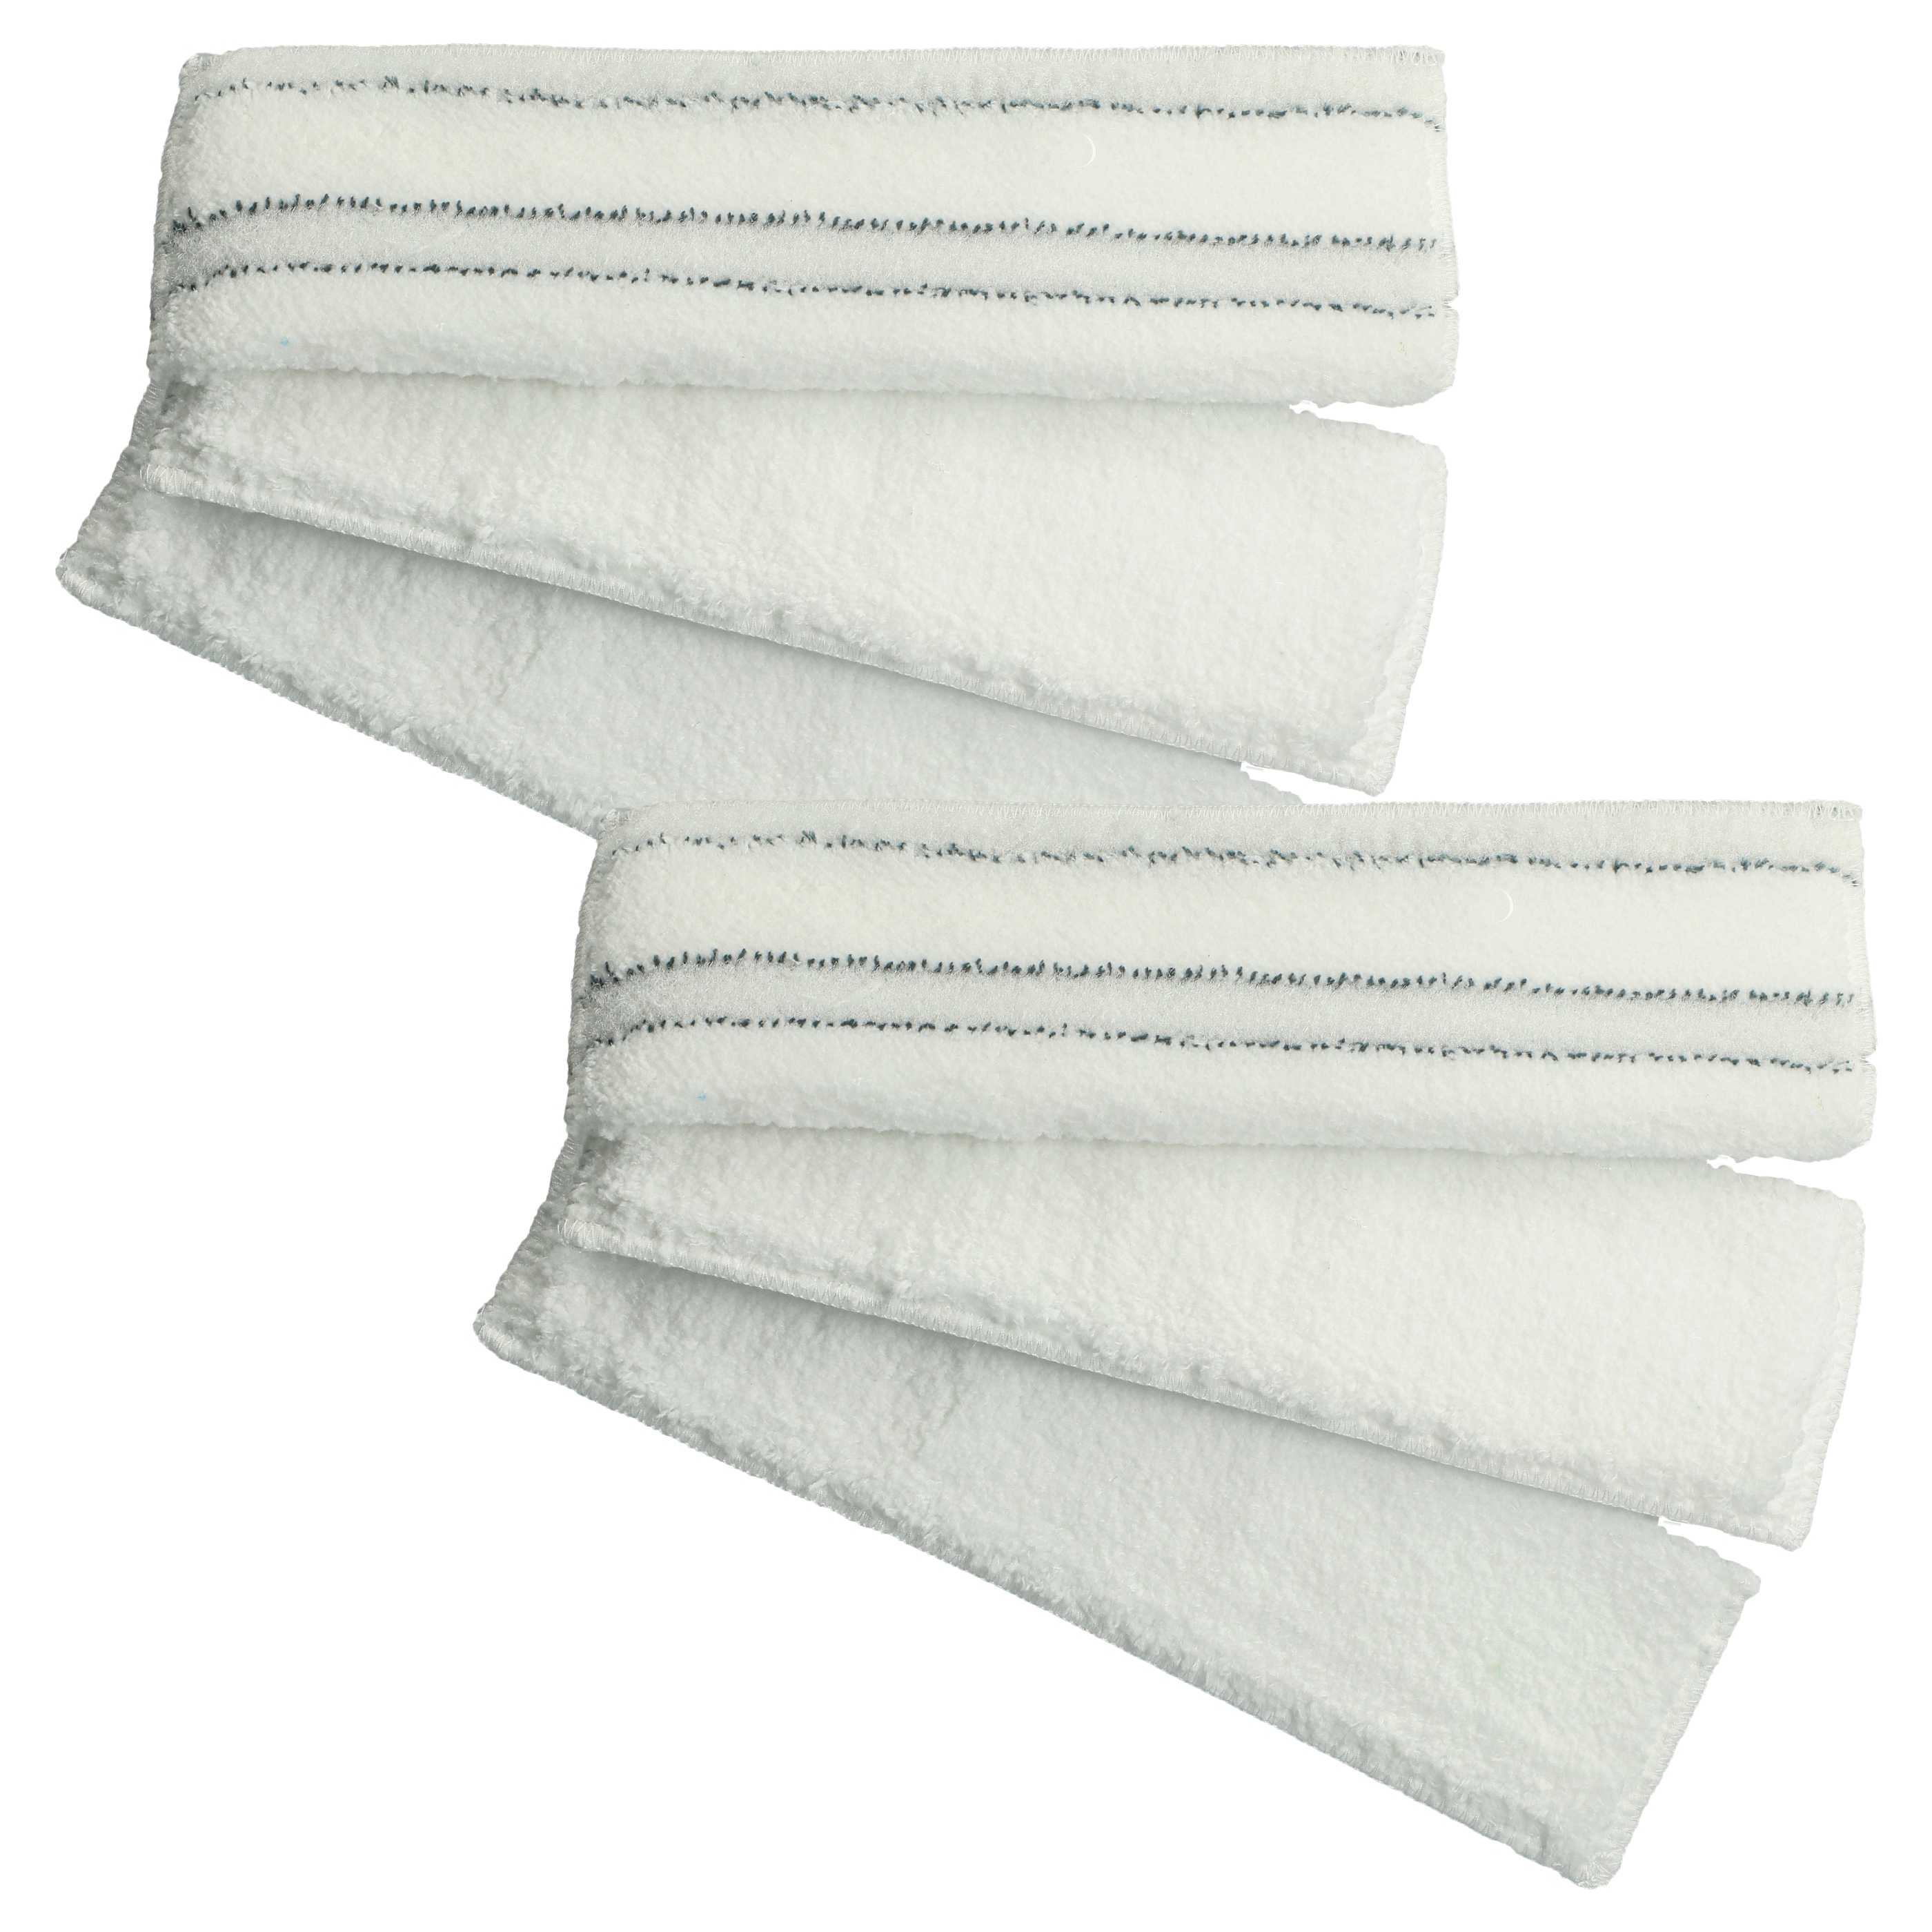  Cleaning Cloth Set (6 Part) replaces Thomas 787204 for Vacuum Cleaner - microfibre